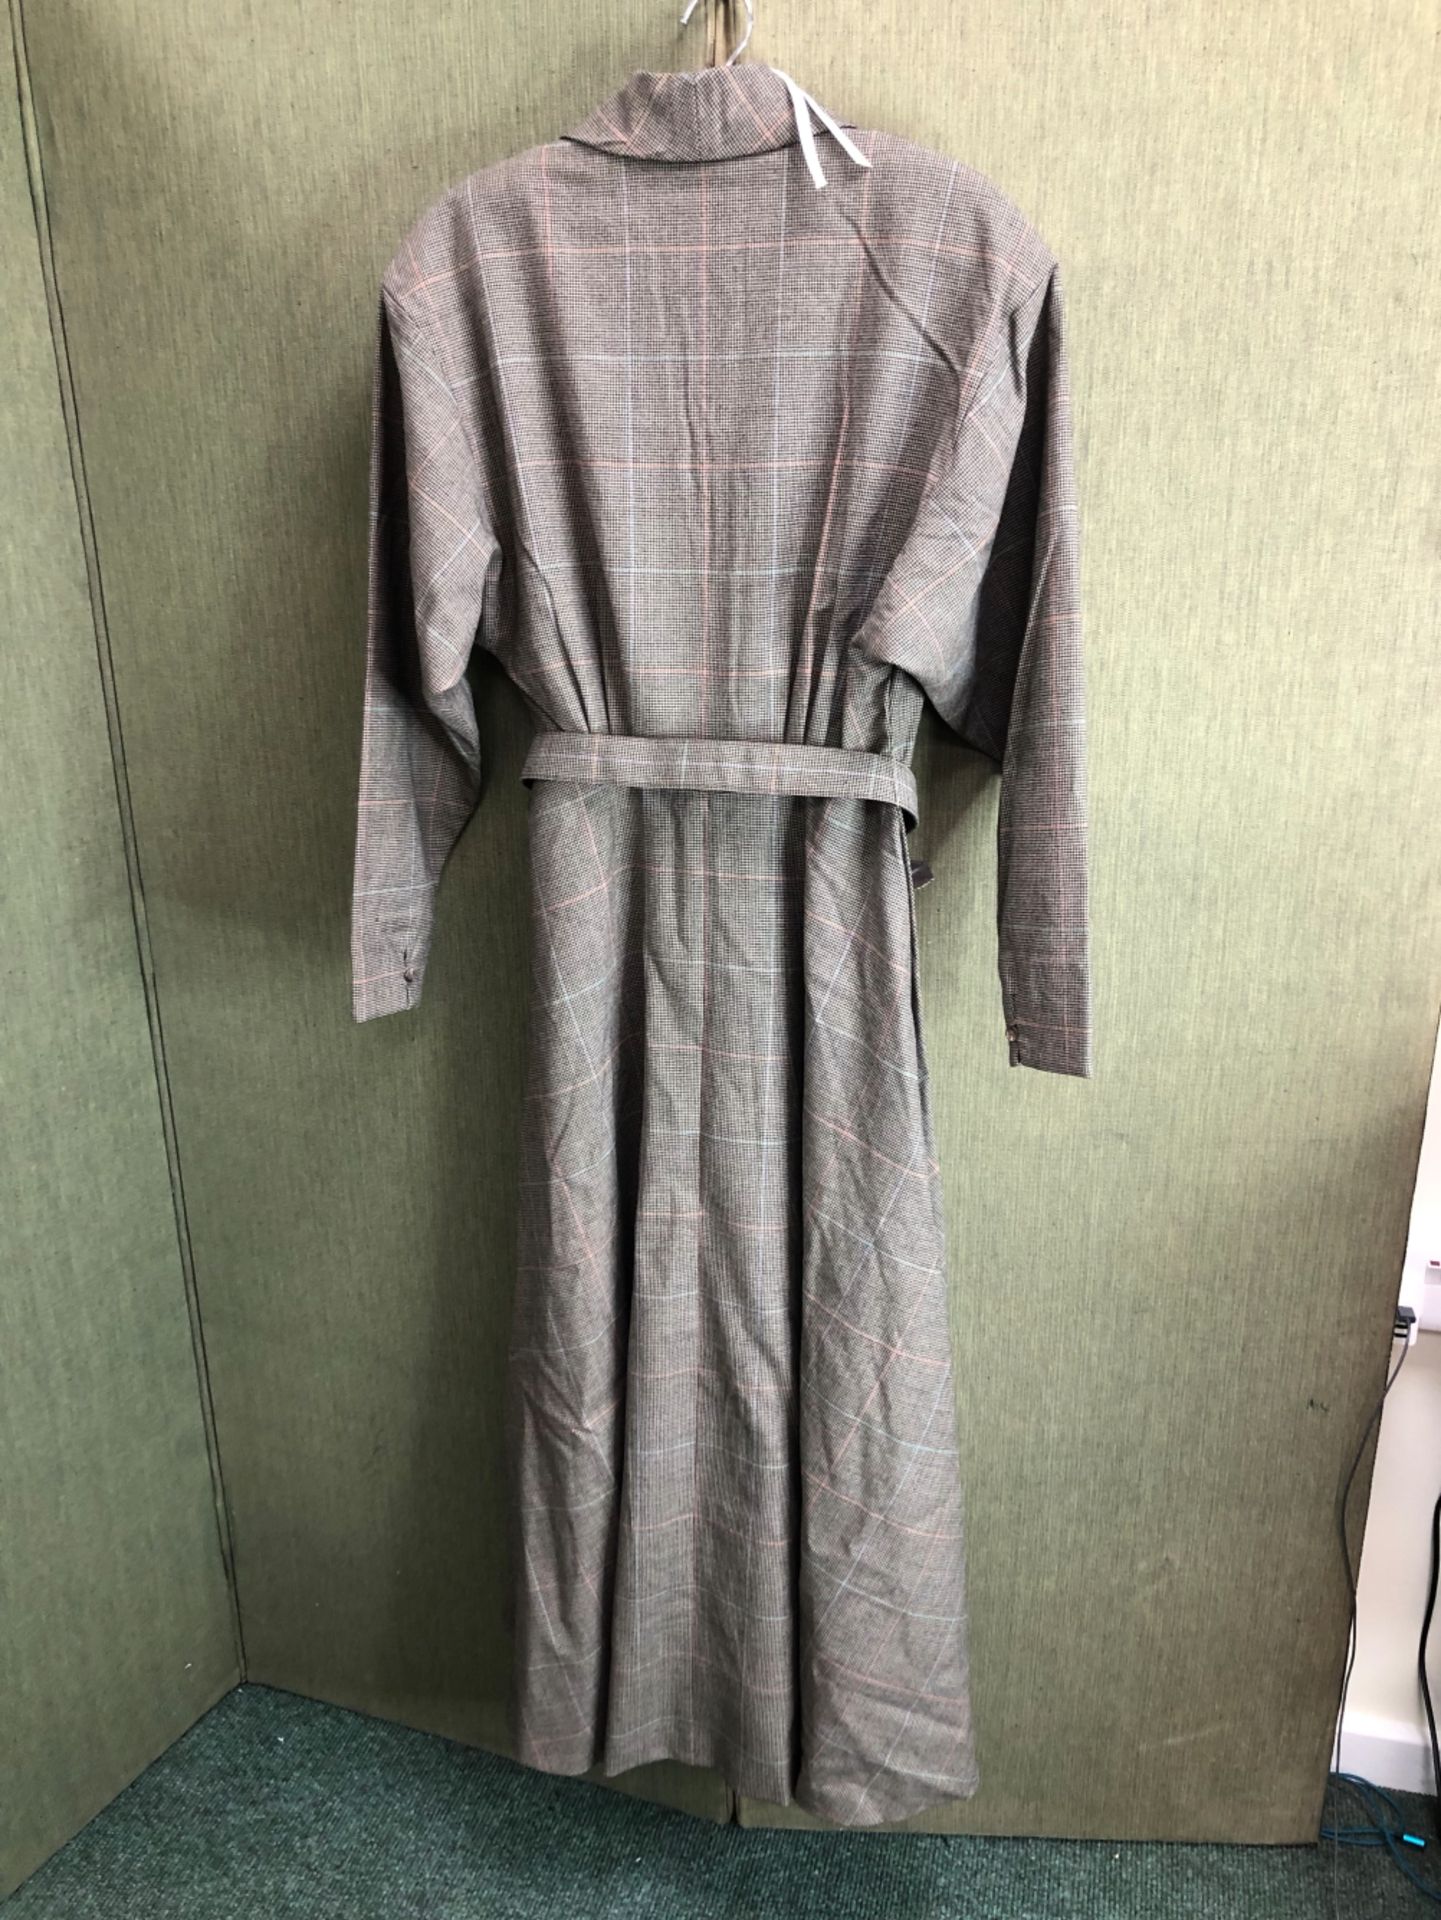 DRESS. EARLY 1980's RALPH LAUREN BELTED WOOL DRESS, US SIZE 8 - Image 4 of 8